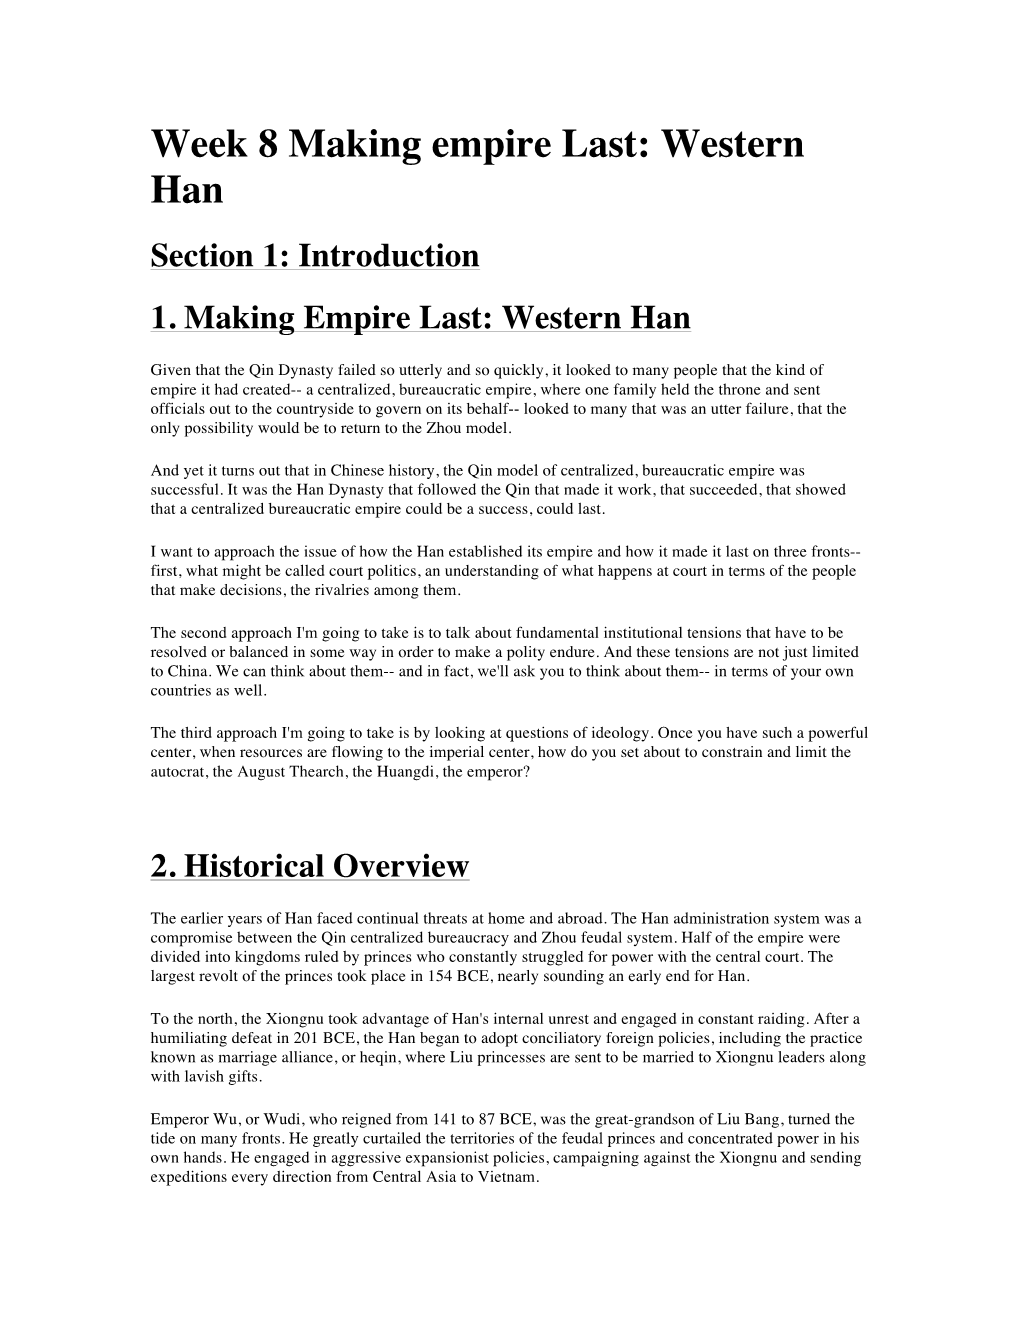 Western Han Section 1: Introduction